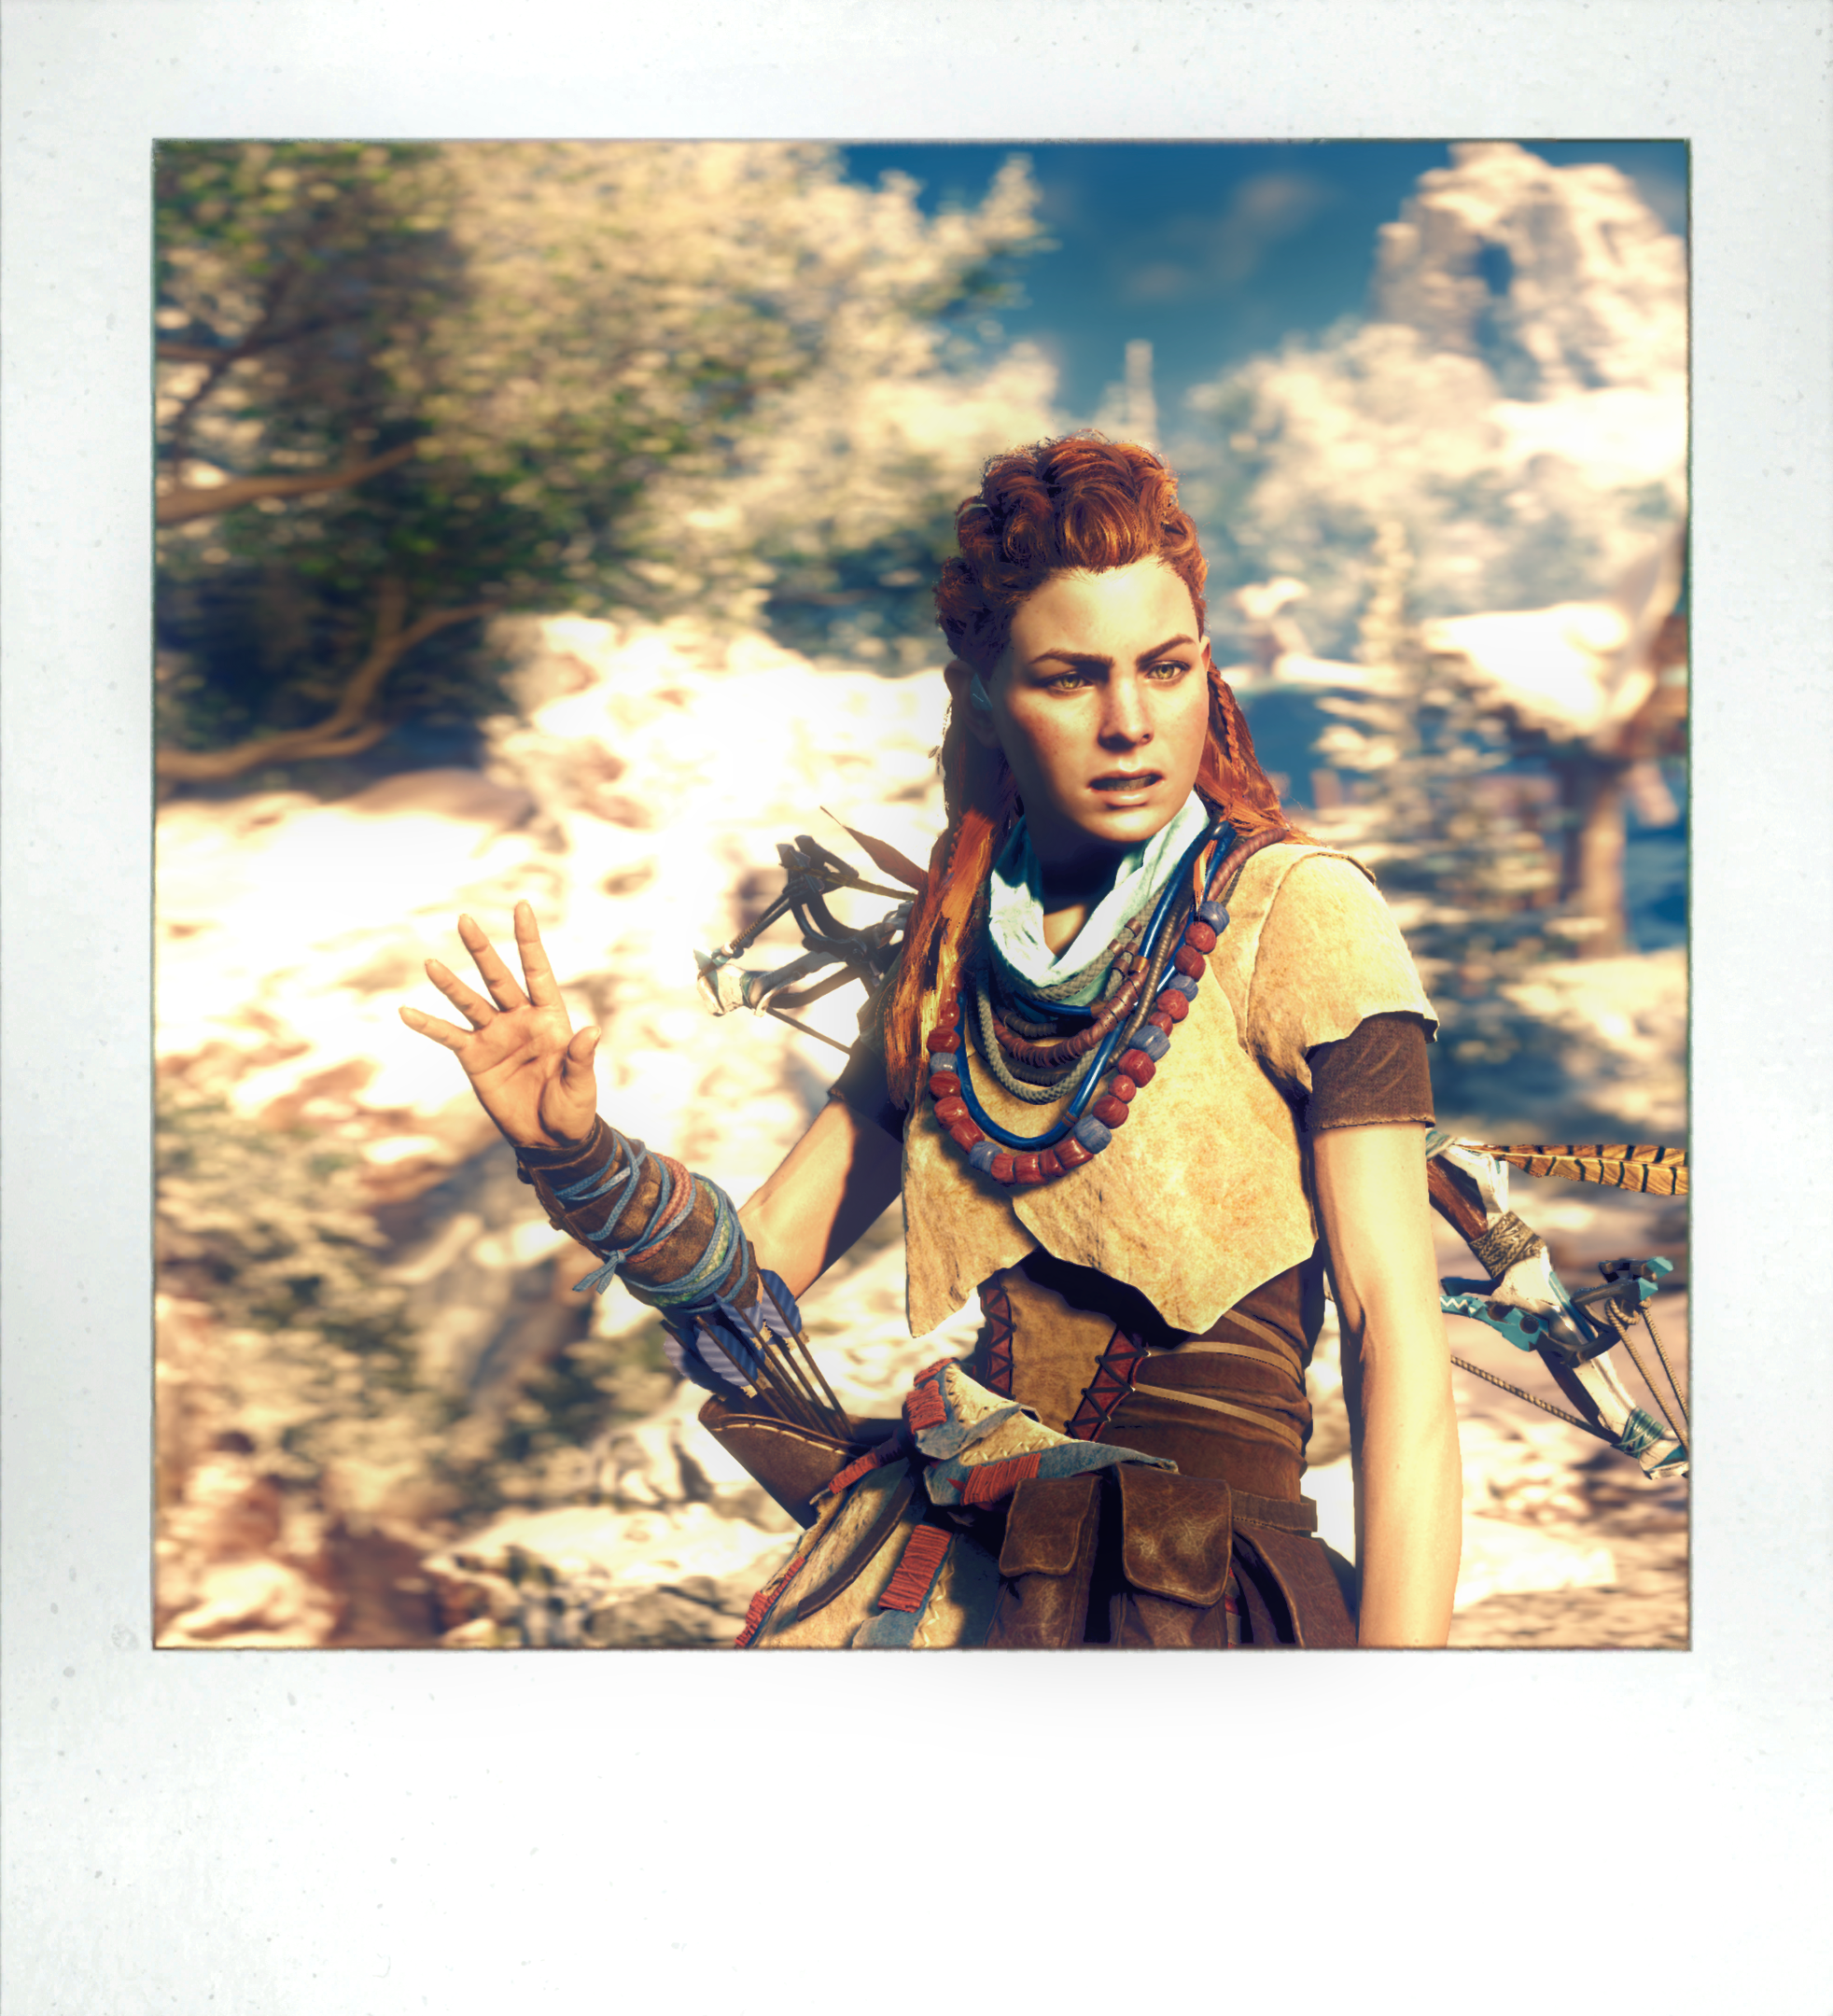 So, after discovering Ashly Burch was *also* Aloy, I couldn't excuse myself from trying to rewind the clock